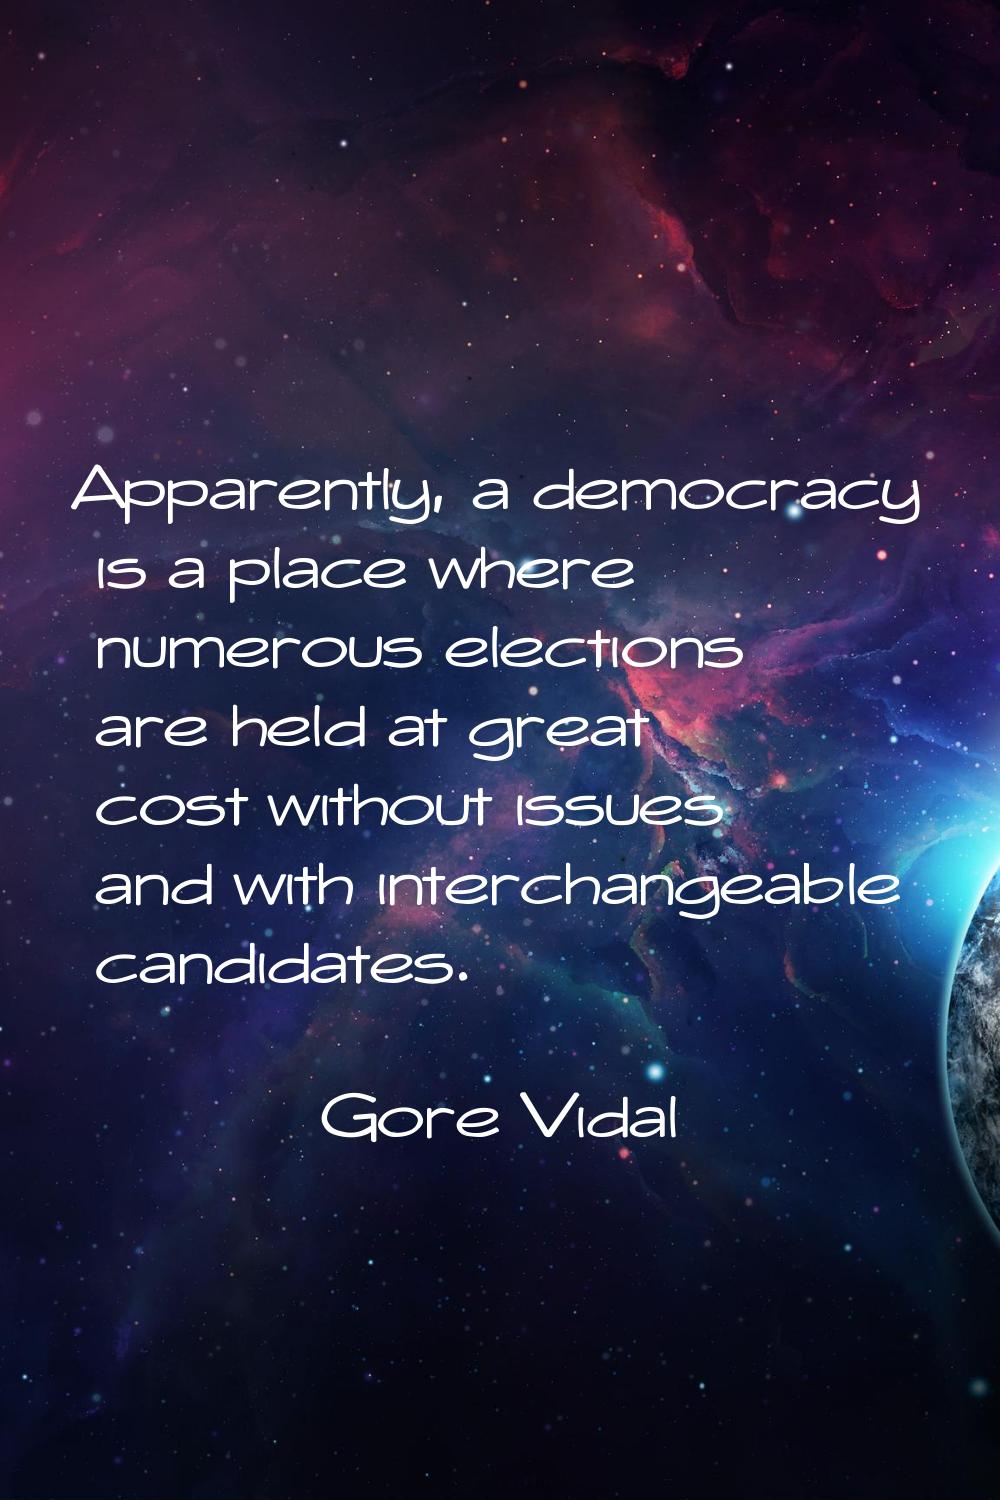 Apparently, a democracy is a place where numerous elections are held at great cost without issues a